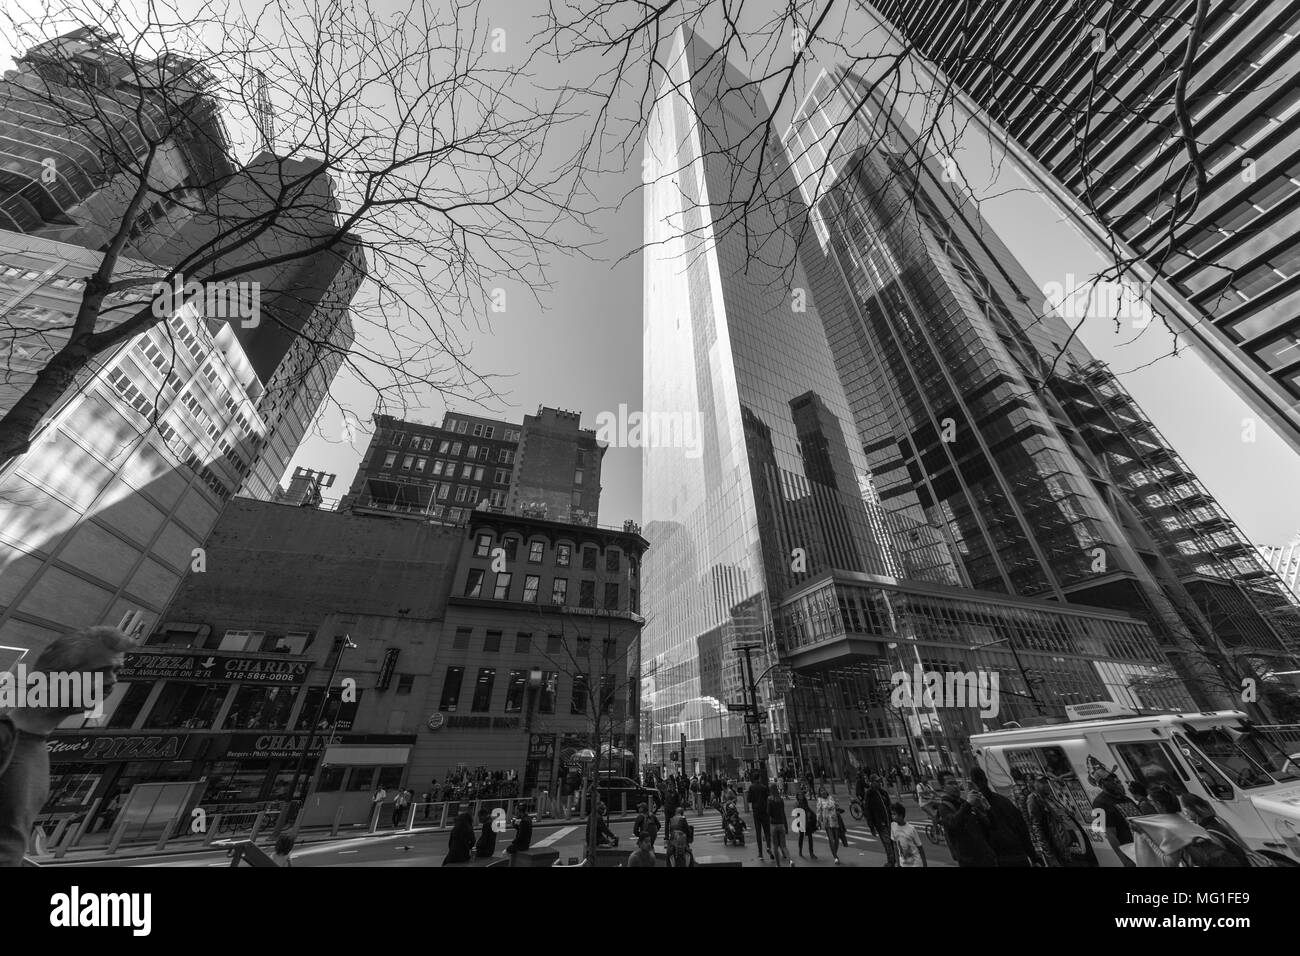 Looking up at buildings in lower Manhattan, New York, NY Stock Photo